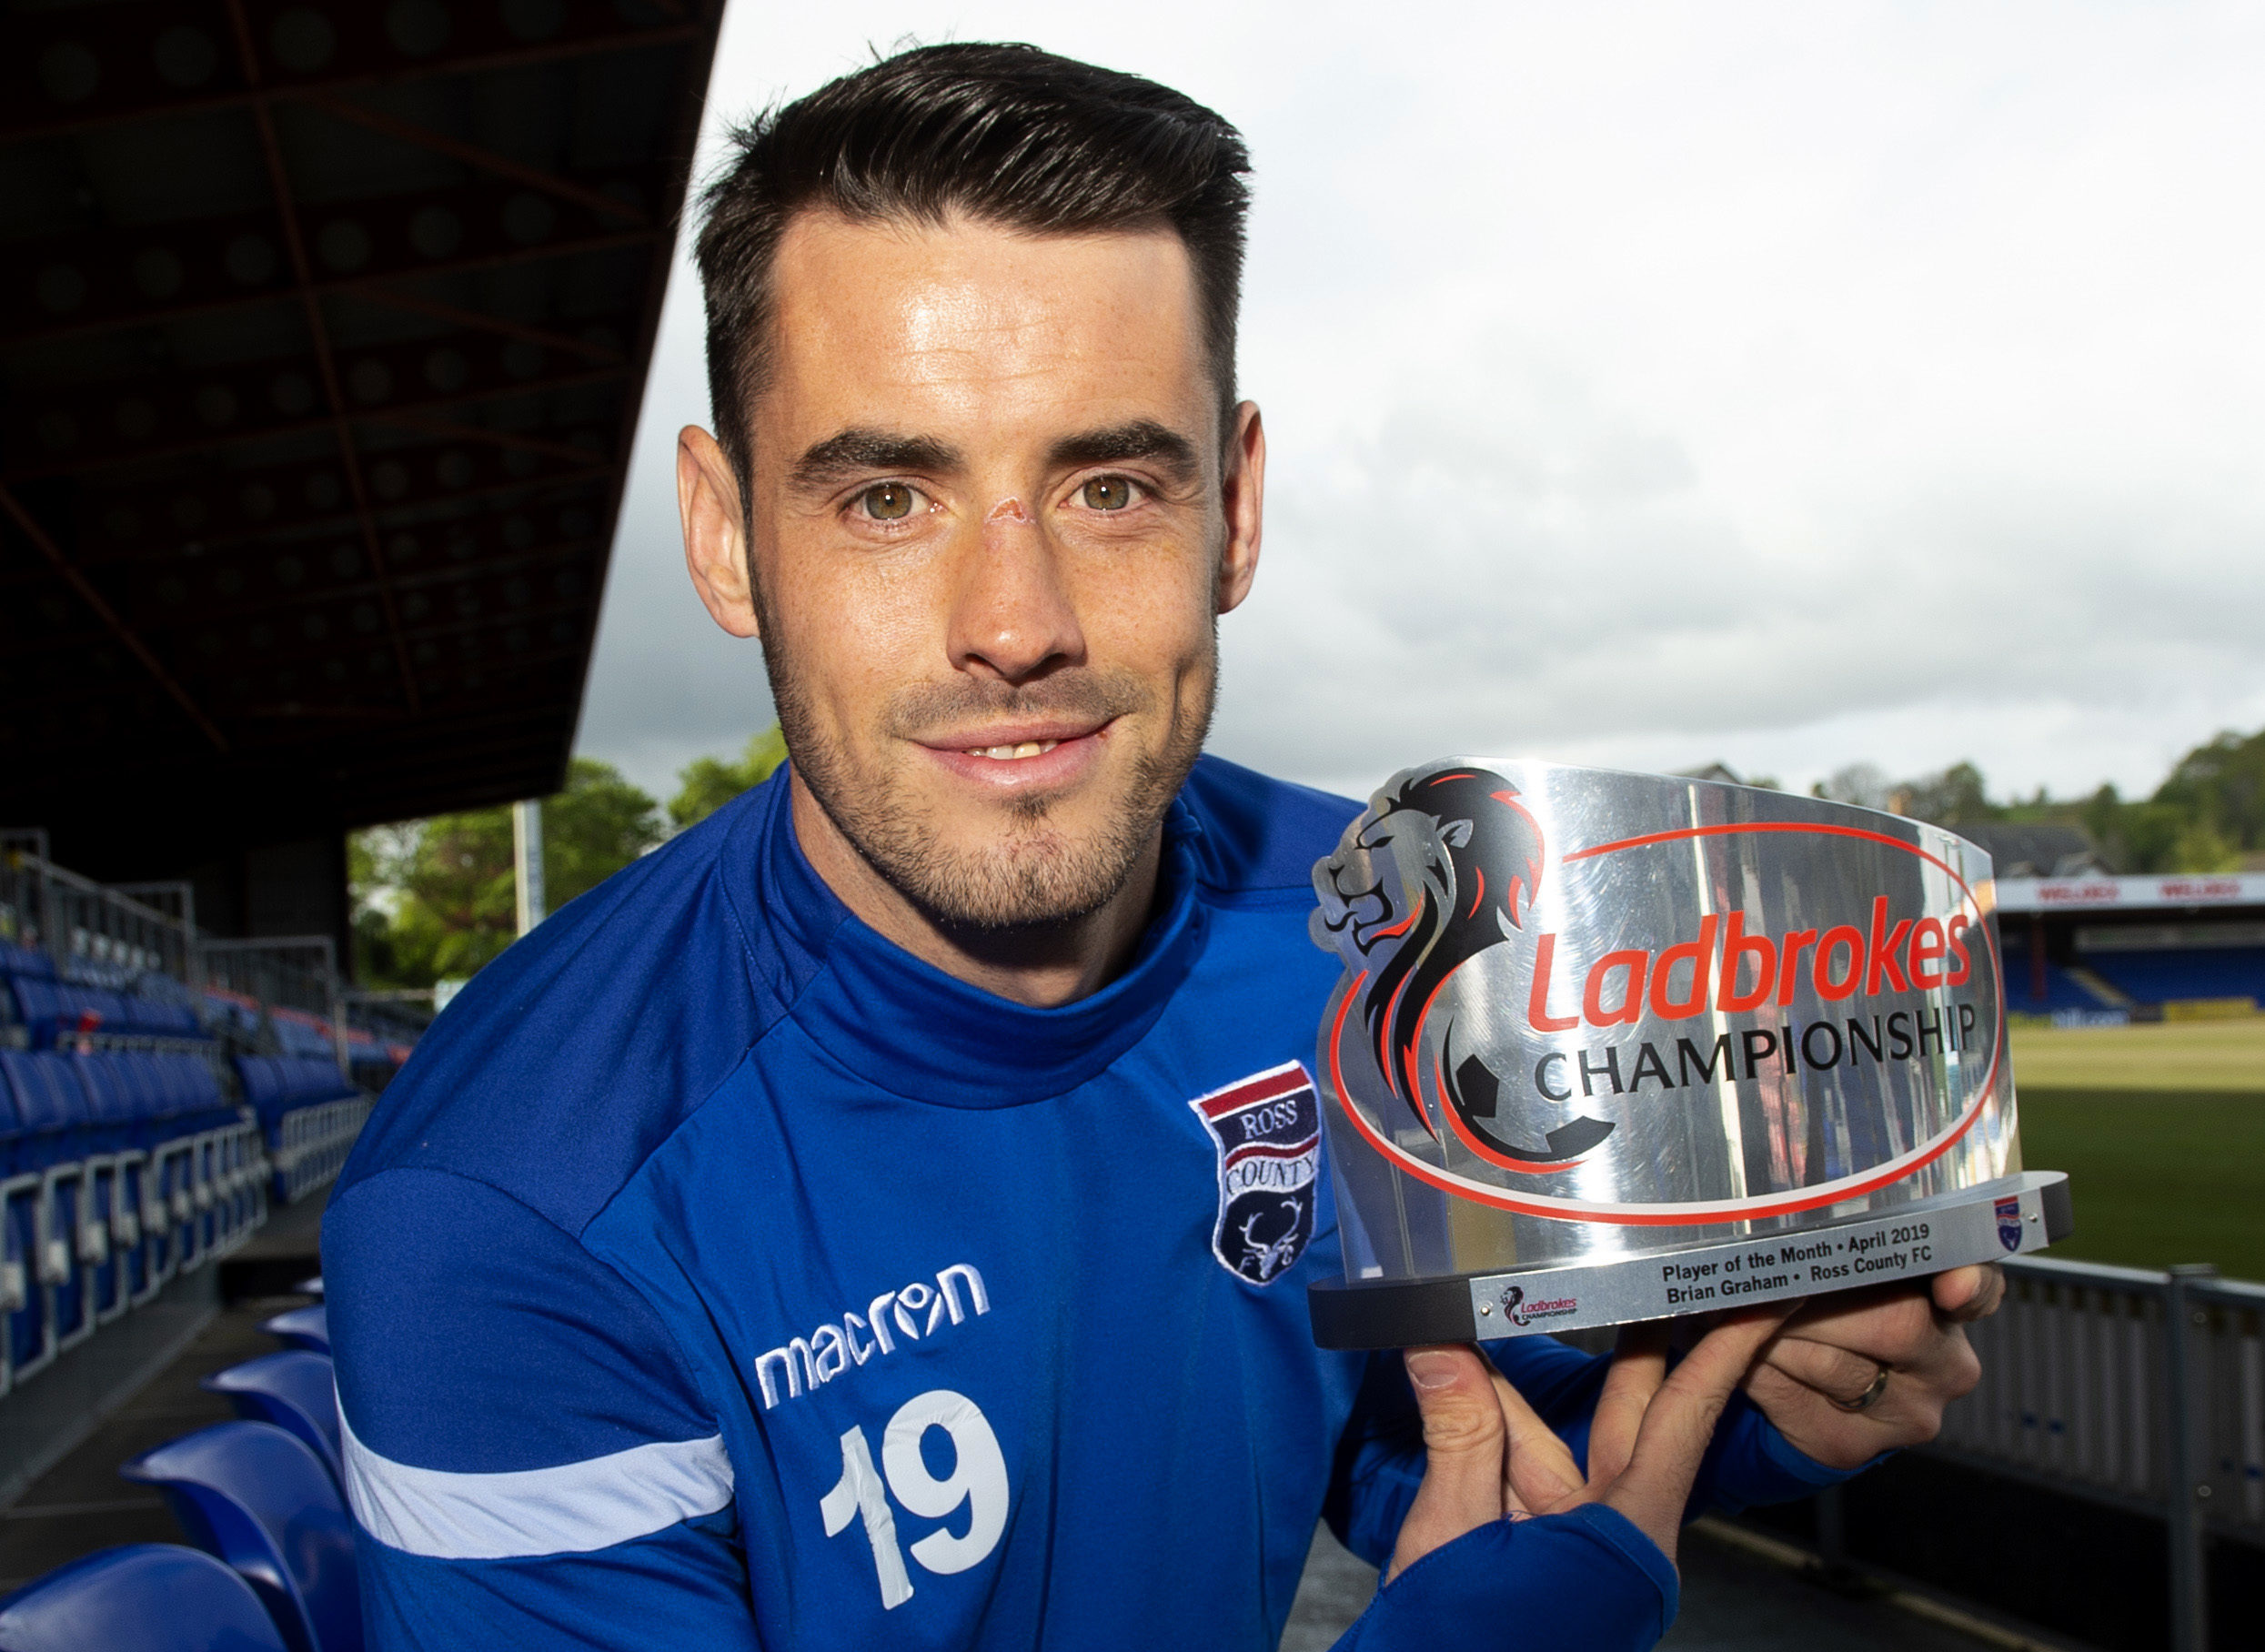 Brian Graham is named as the Ladbrokes Championship Player of the Month for April